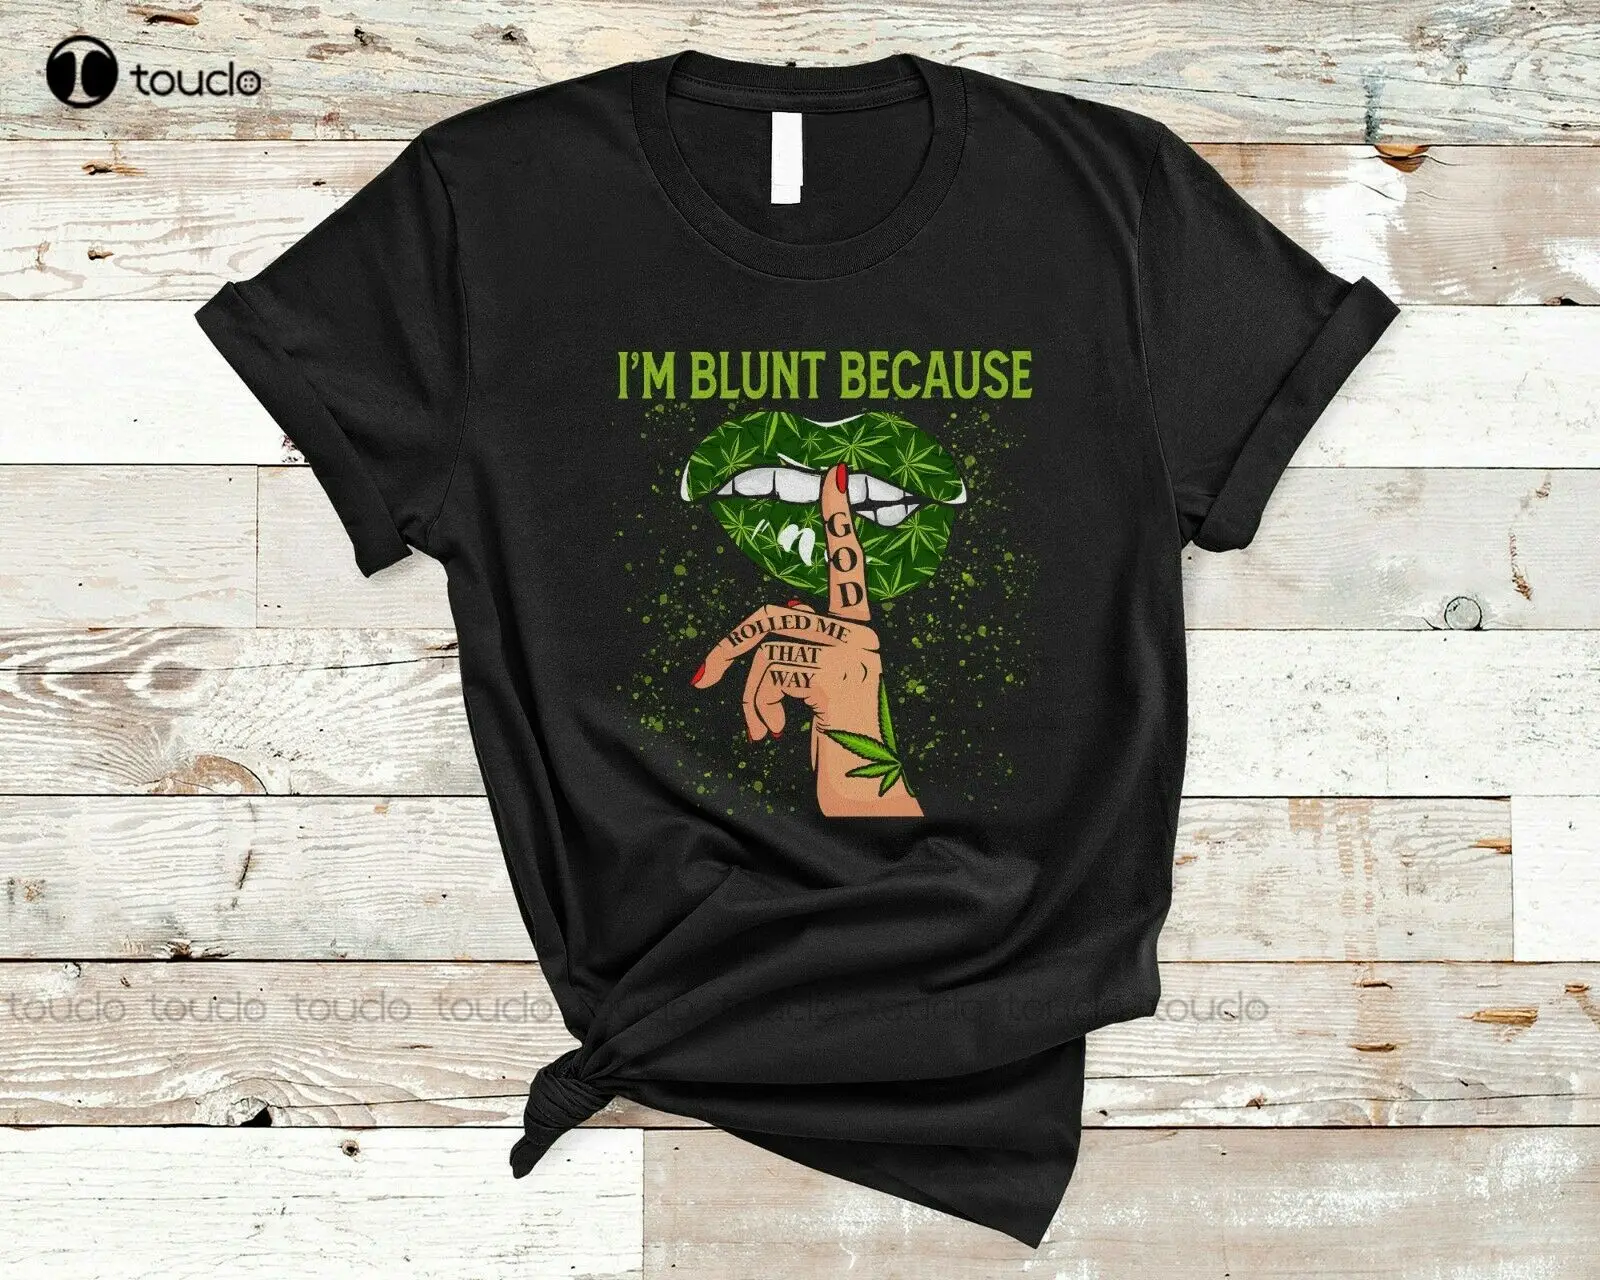 

I'M Blunt Because God Rolled Me That Way Funny Cannabis Weed Stoner Smoker Shirt Mens Dress Shirts Custom Aldult Teen Unisex